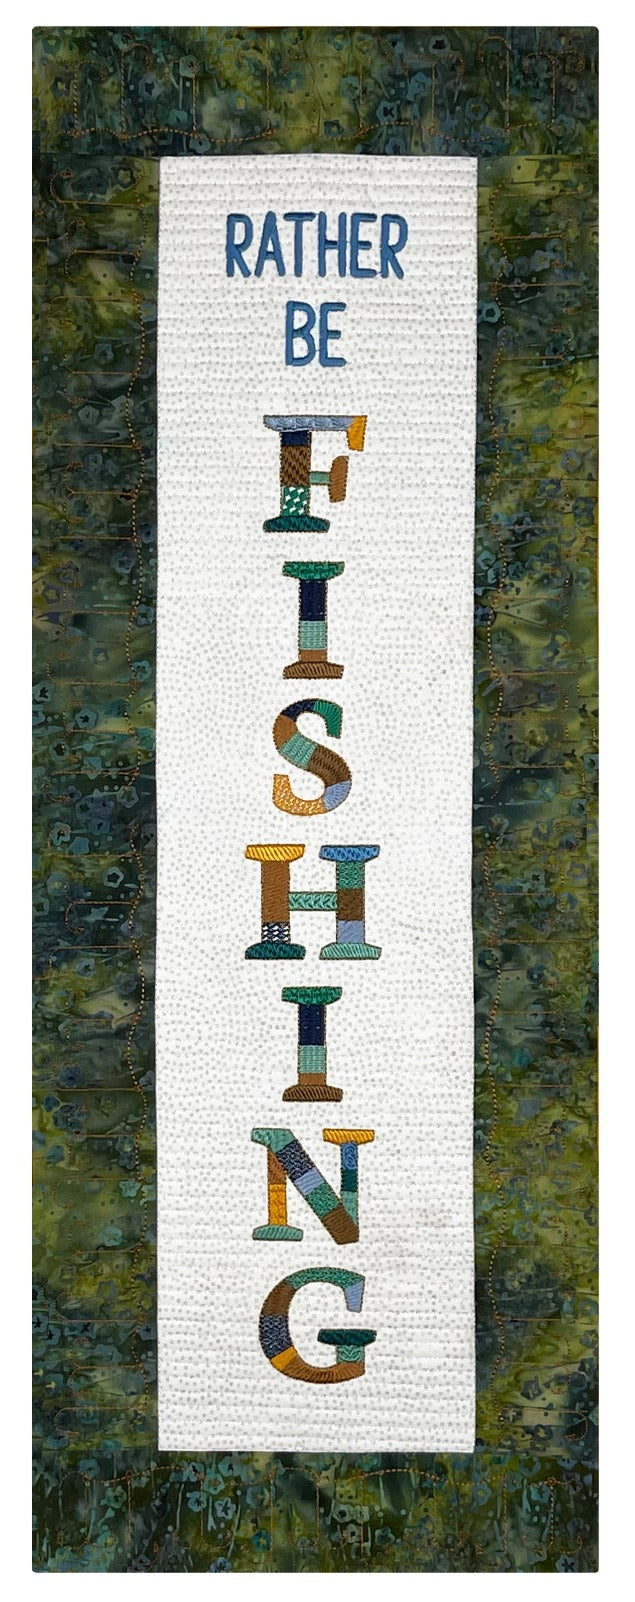 Bit-O-Color Rather Be Fishing Quilted Banner